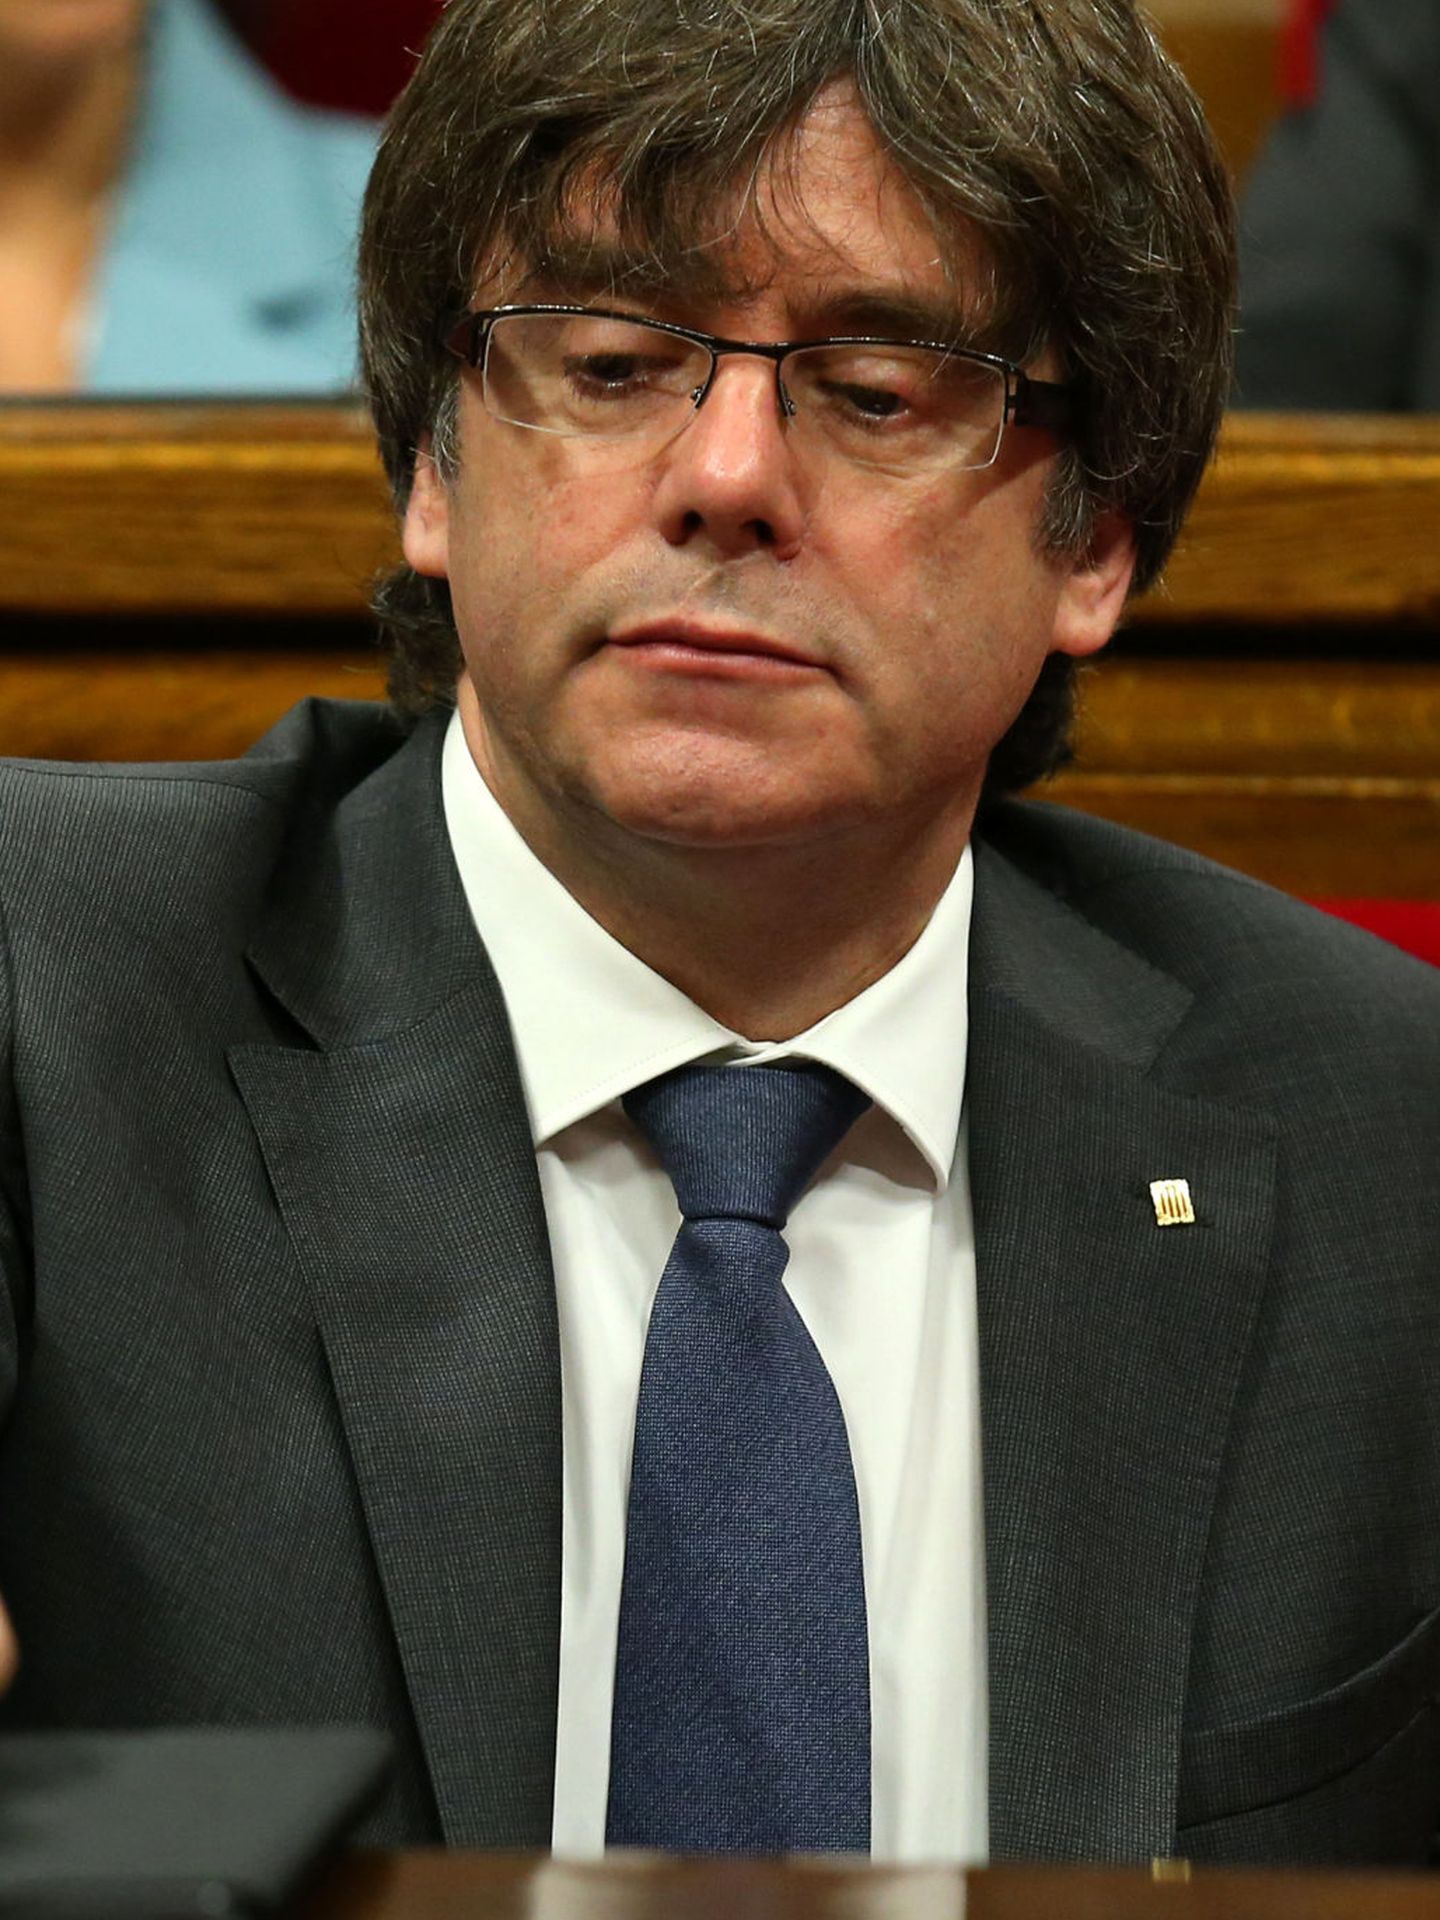 Catalan regional President Carles Puigdemont attends a session of the Catalonian regional Parliament in Barcelona, Spain, September 6, 2017. REUTERS Albert Gea